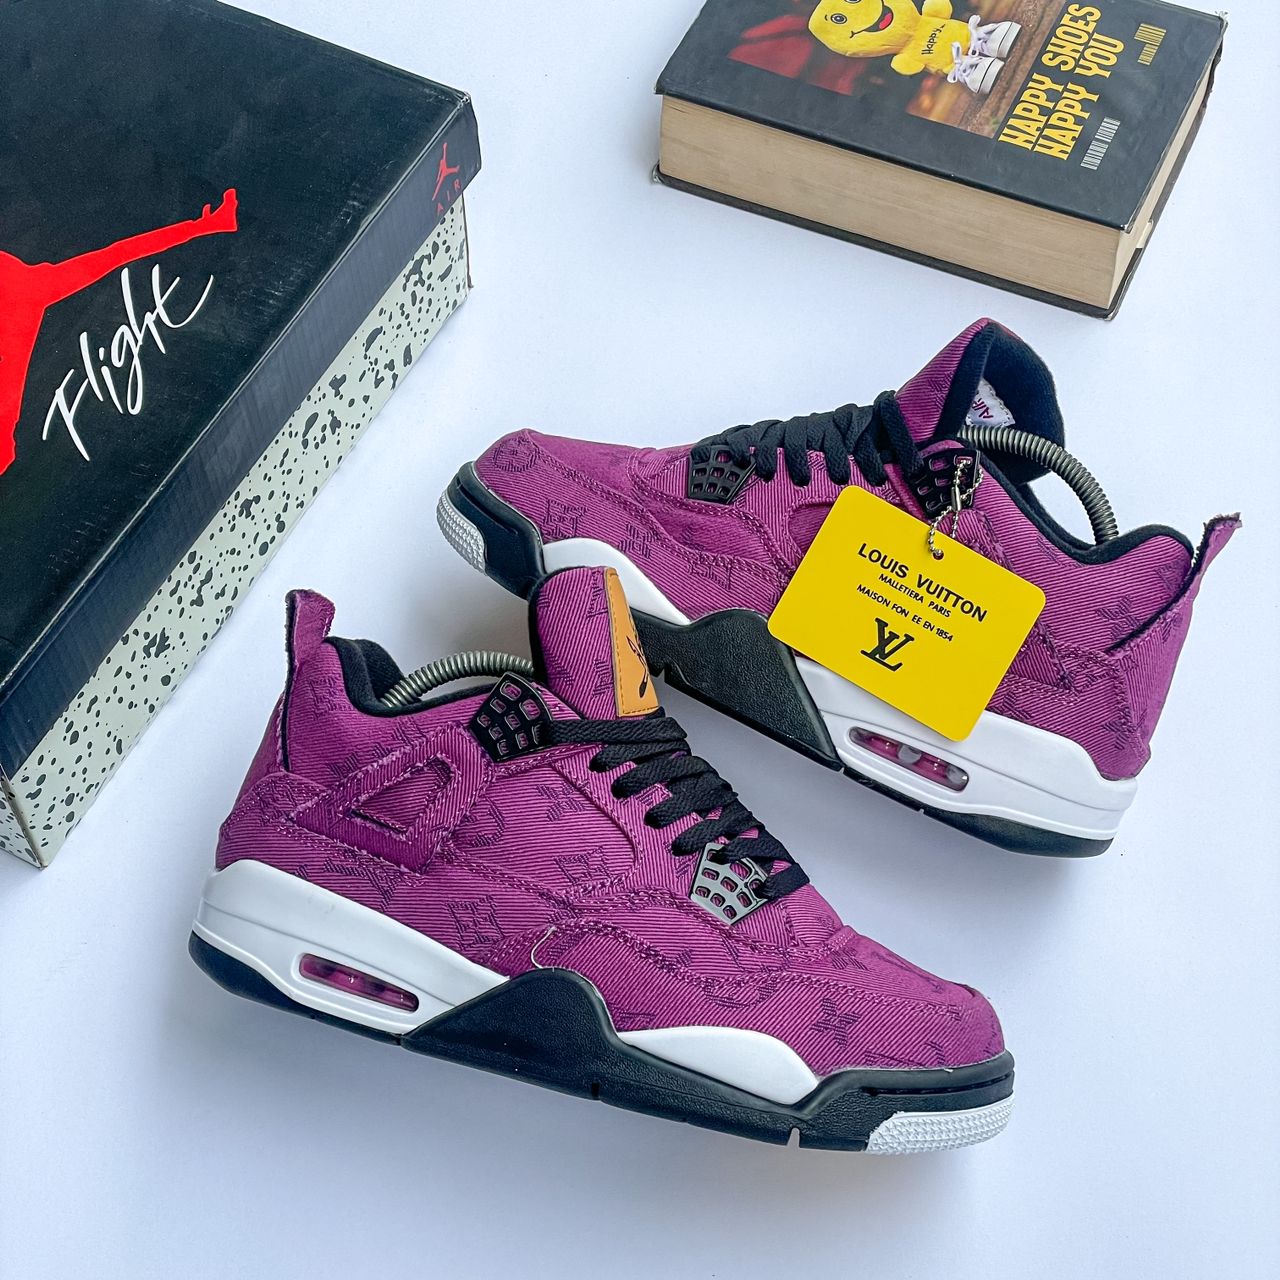 Кроссовки nike air jordan retro 4 cement 20 Custom Louis Vuitton Don  Anthracite by Dank  Jordan Brand entered mainland China for the first time  in 1997  IetpShops